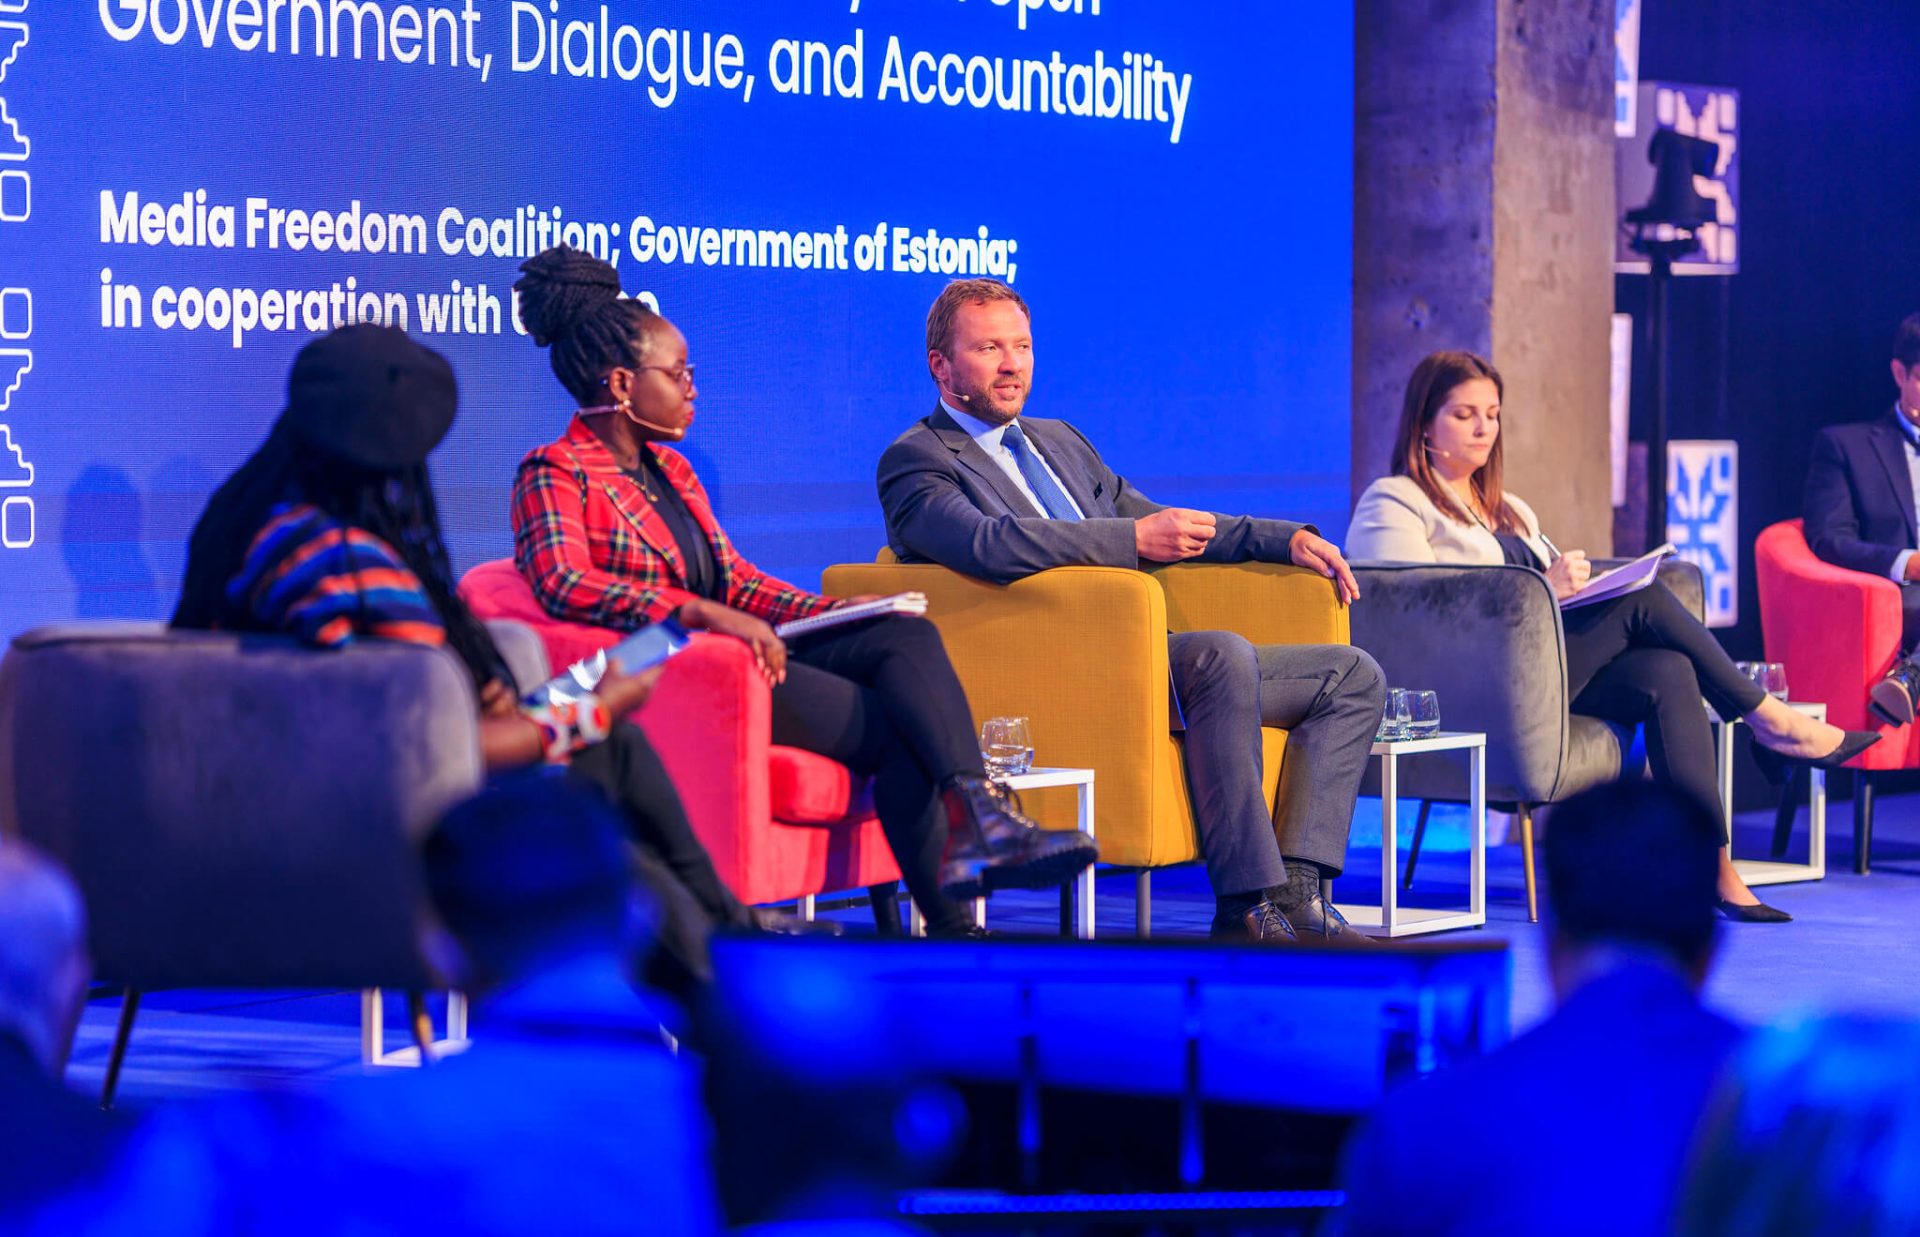 Power and importance of journalism underlined at open government summit in Estonia